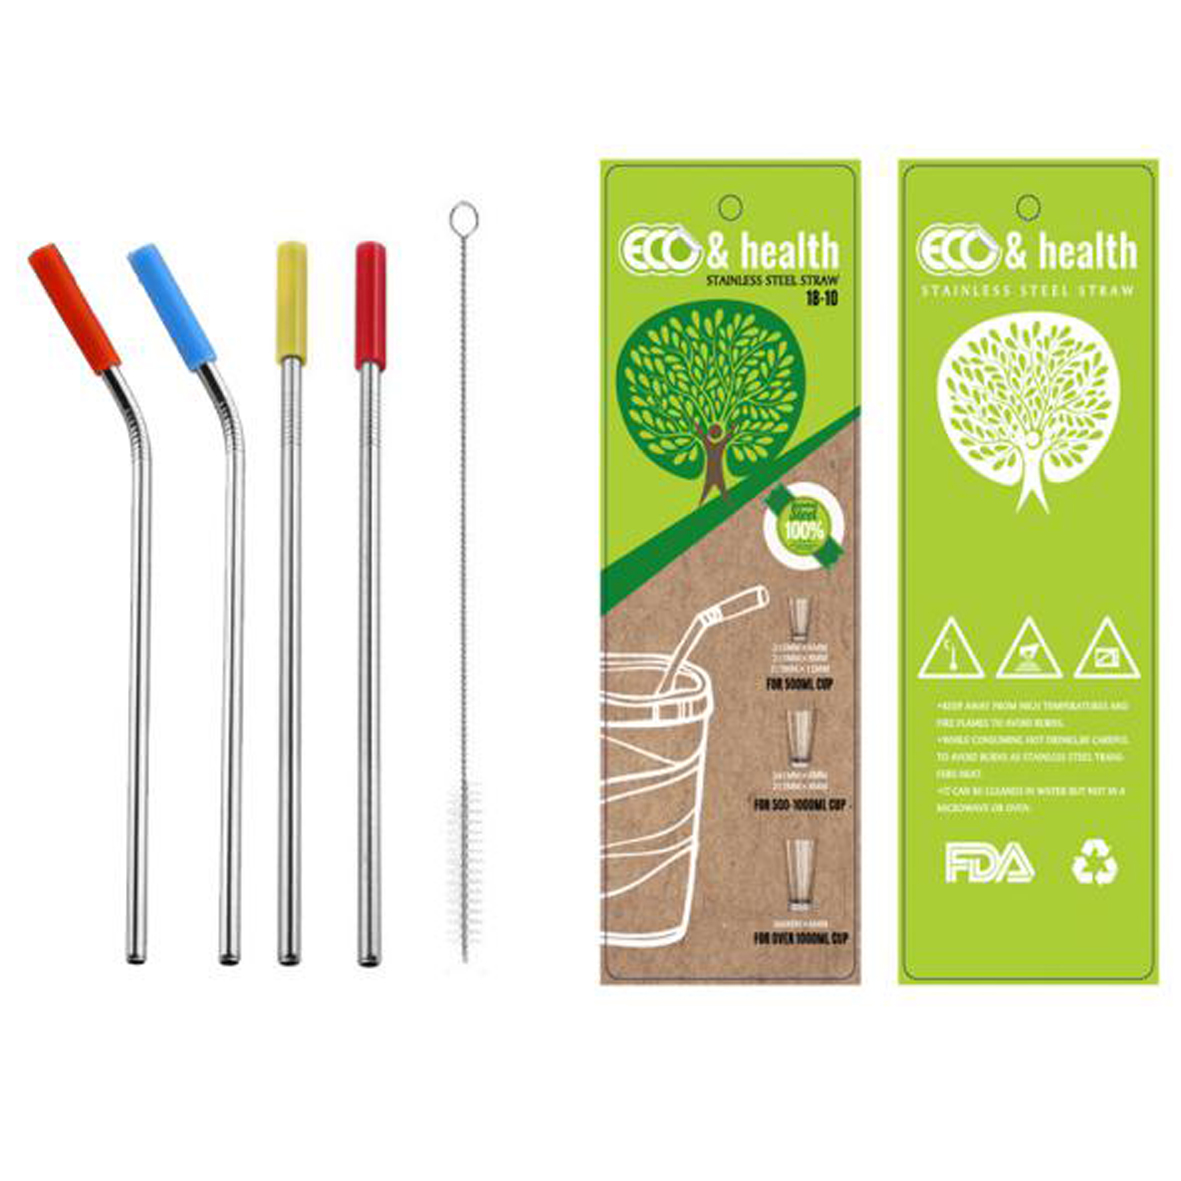 GL-ELY1270 5 in 1 Steel Straw Set with Cardboard Packing